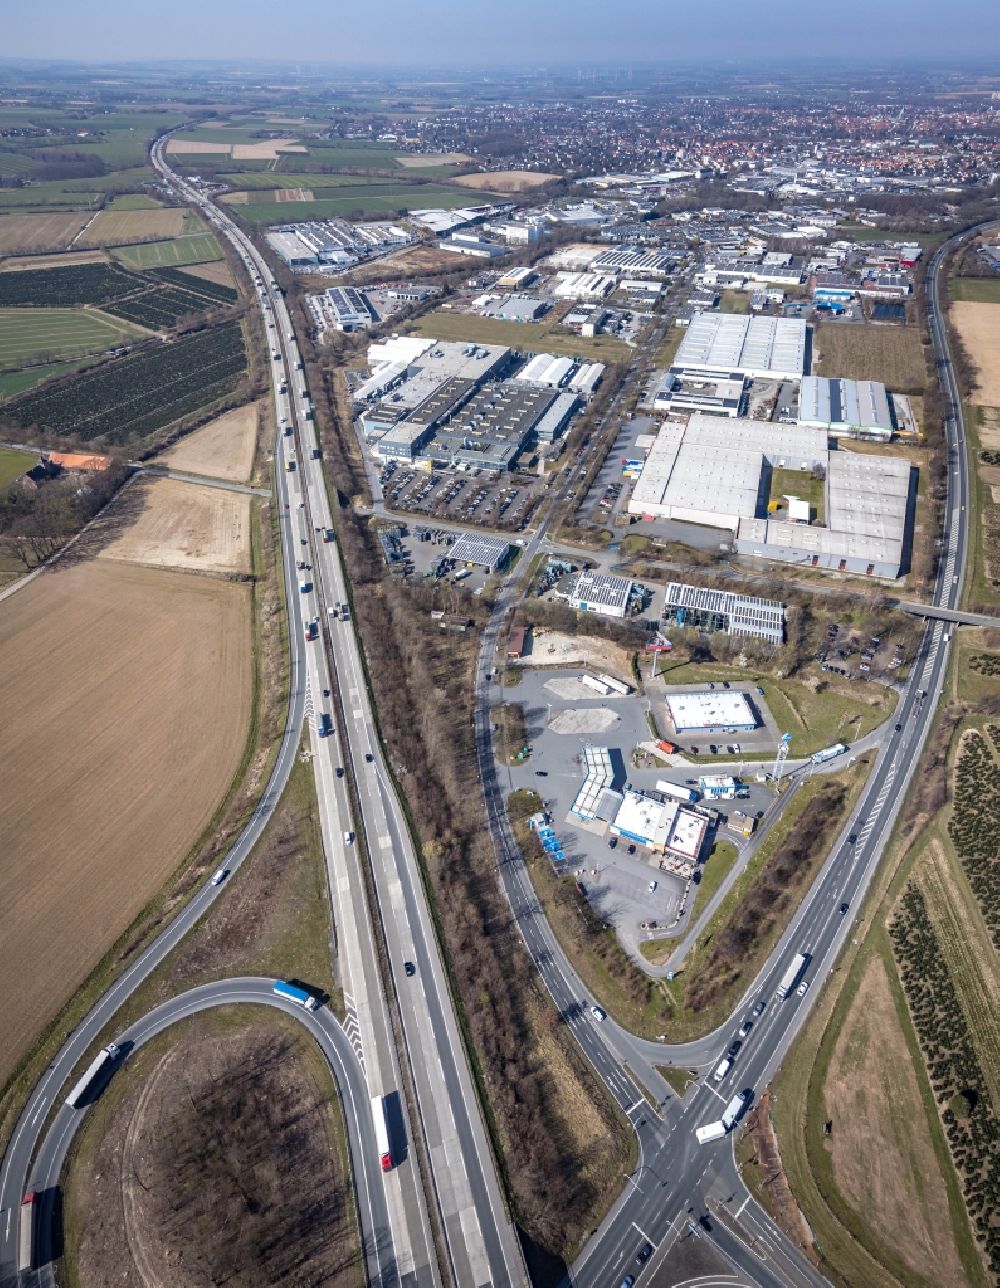 Aerial photograph Soest - industrial and commercial area on Overweg - Lange Wende in Soest in the state North Rhine-Westphalia, Germany